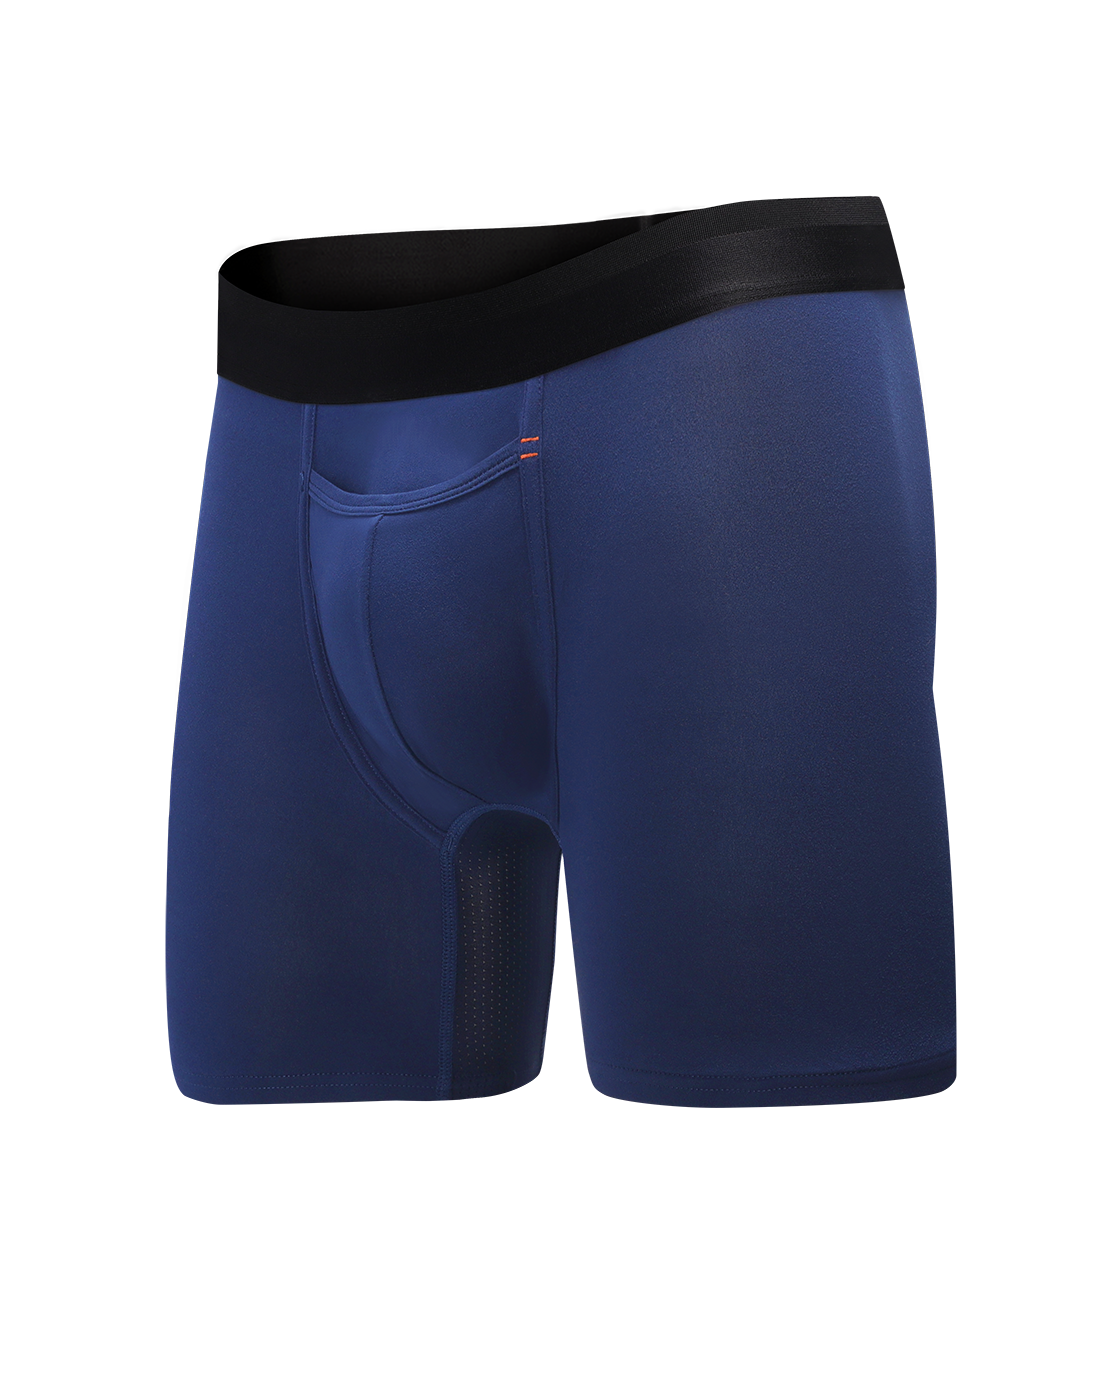 Sweat Proof Boxer Brief + Fly // Black + Blue